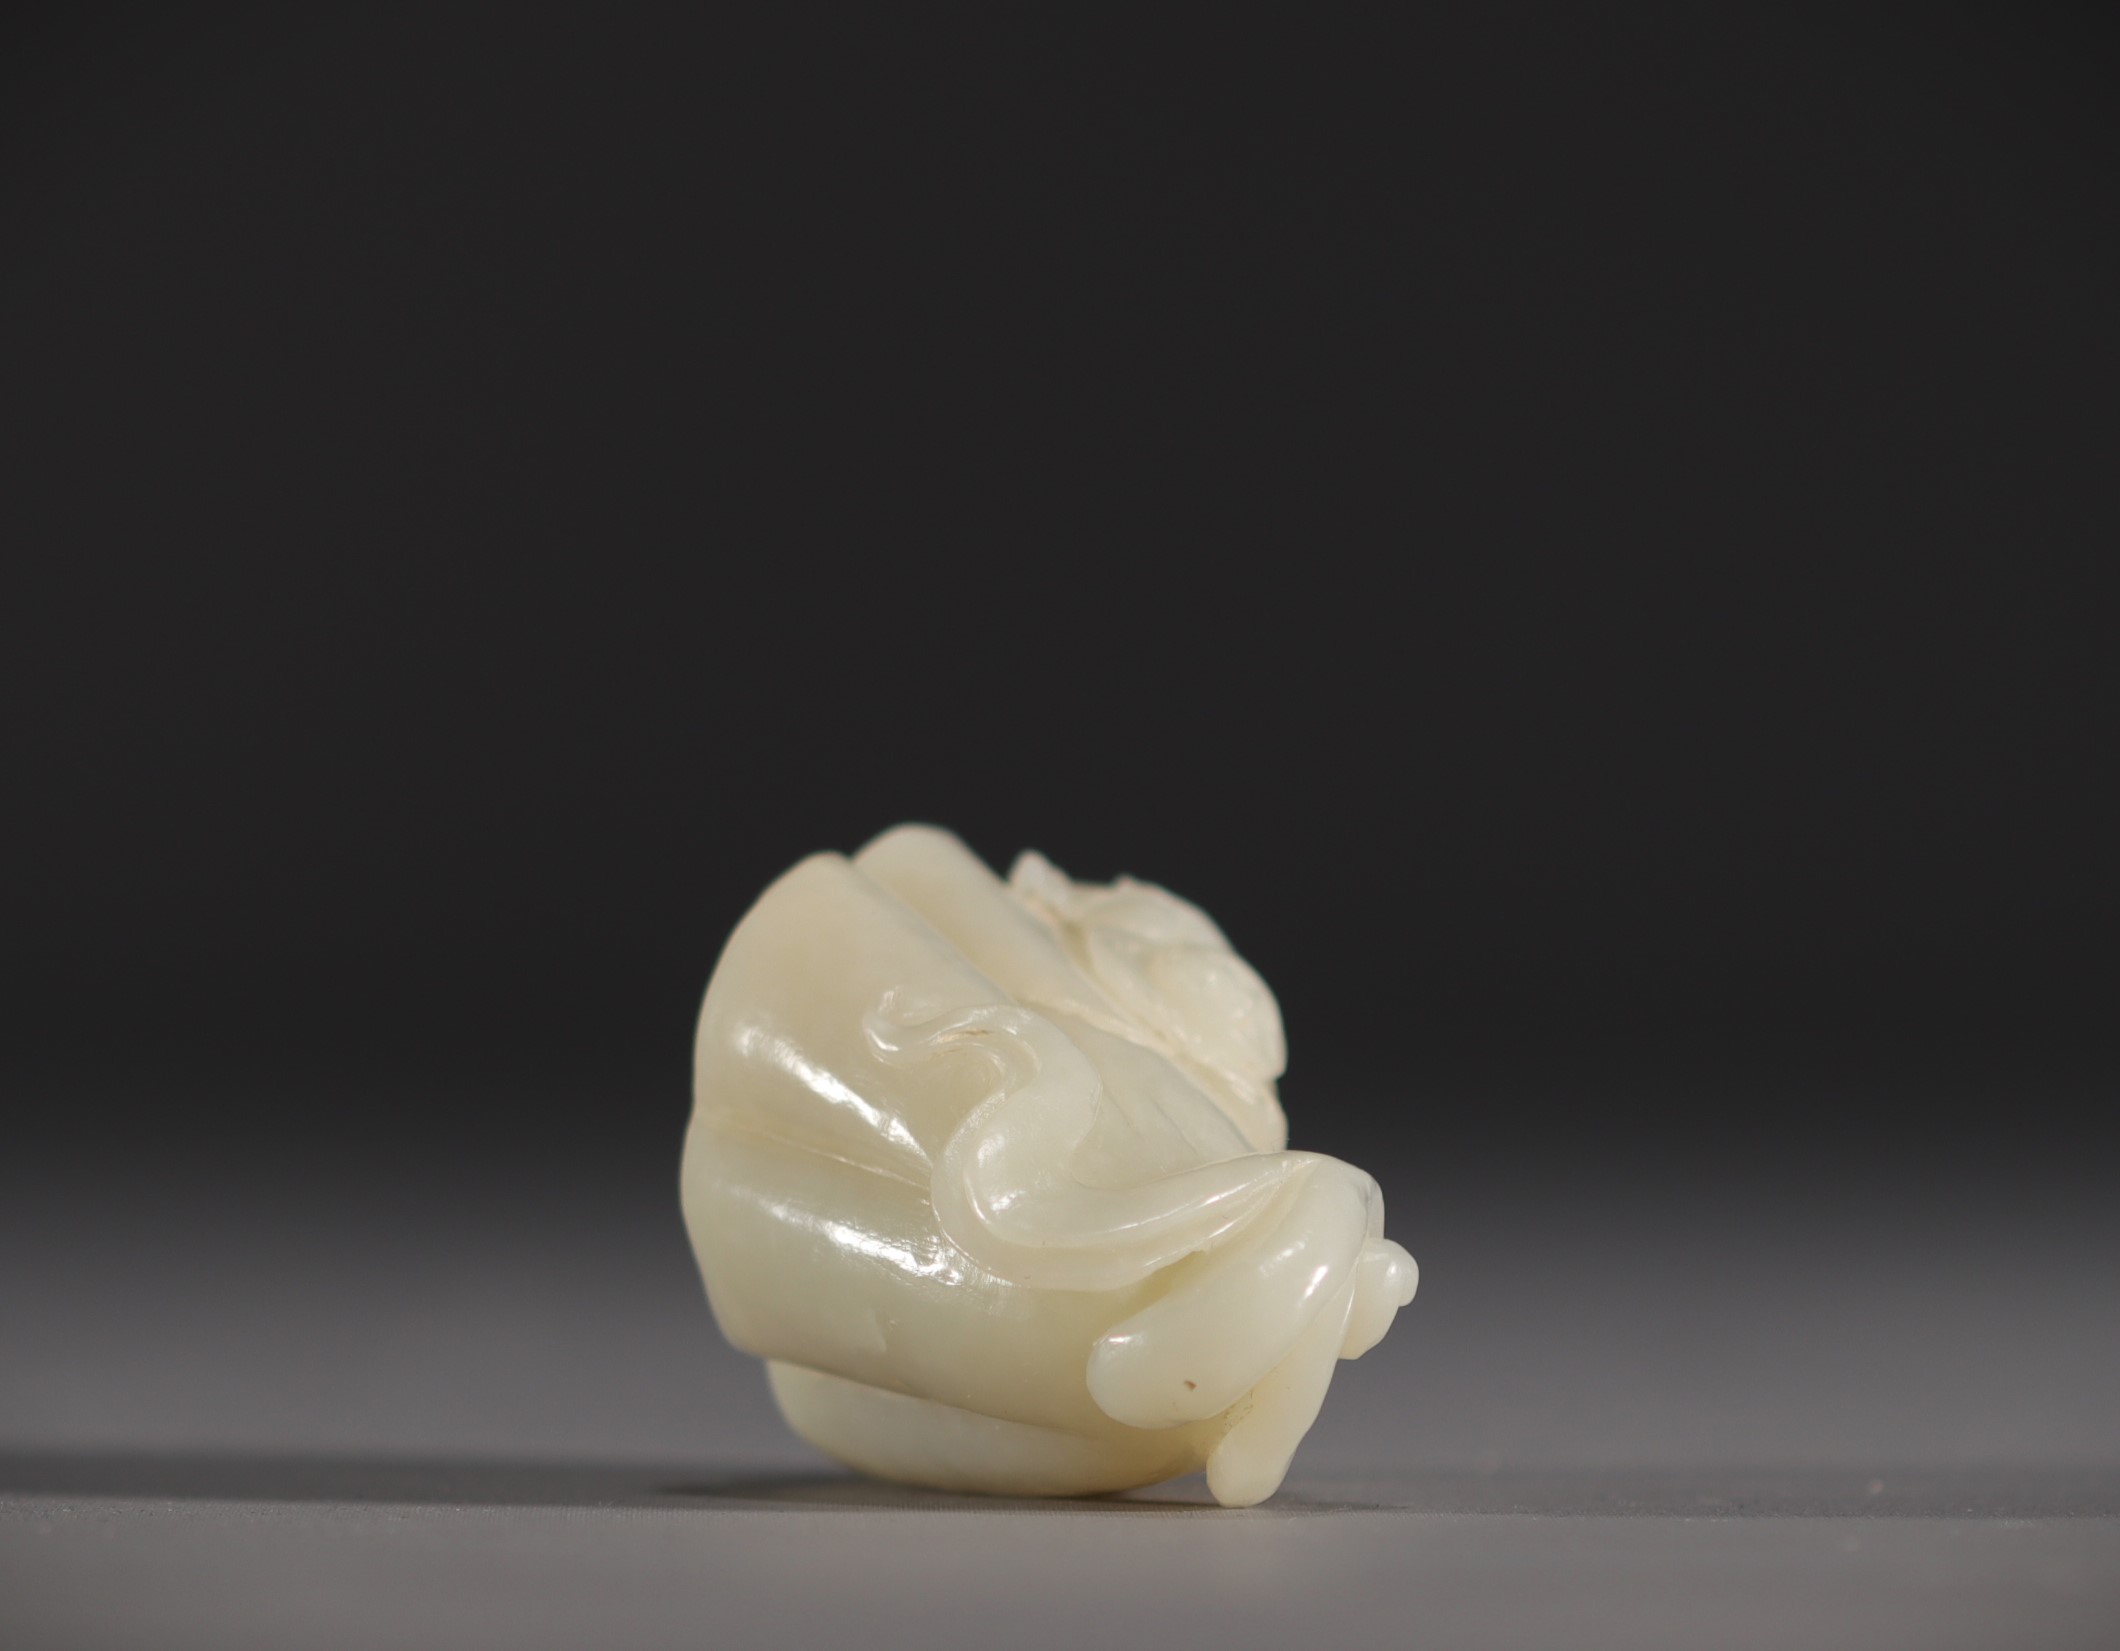 China - White jade pendant in the shape of a fruit surmounted by a young child. - Image 5 of 6